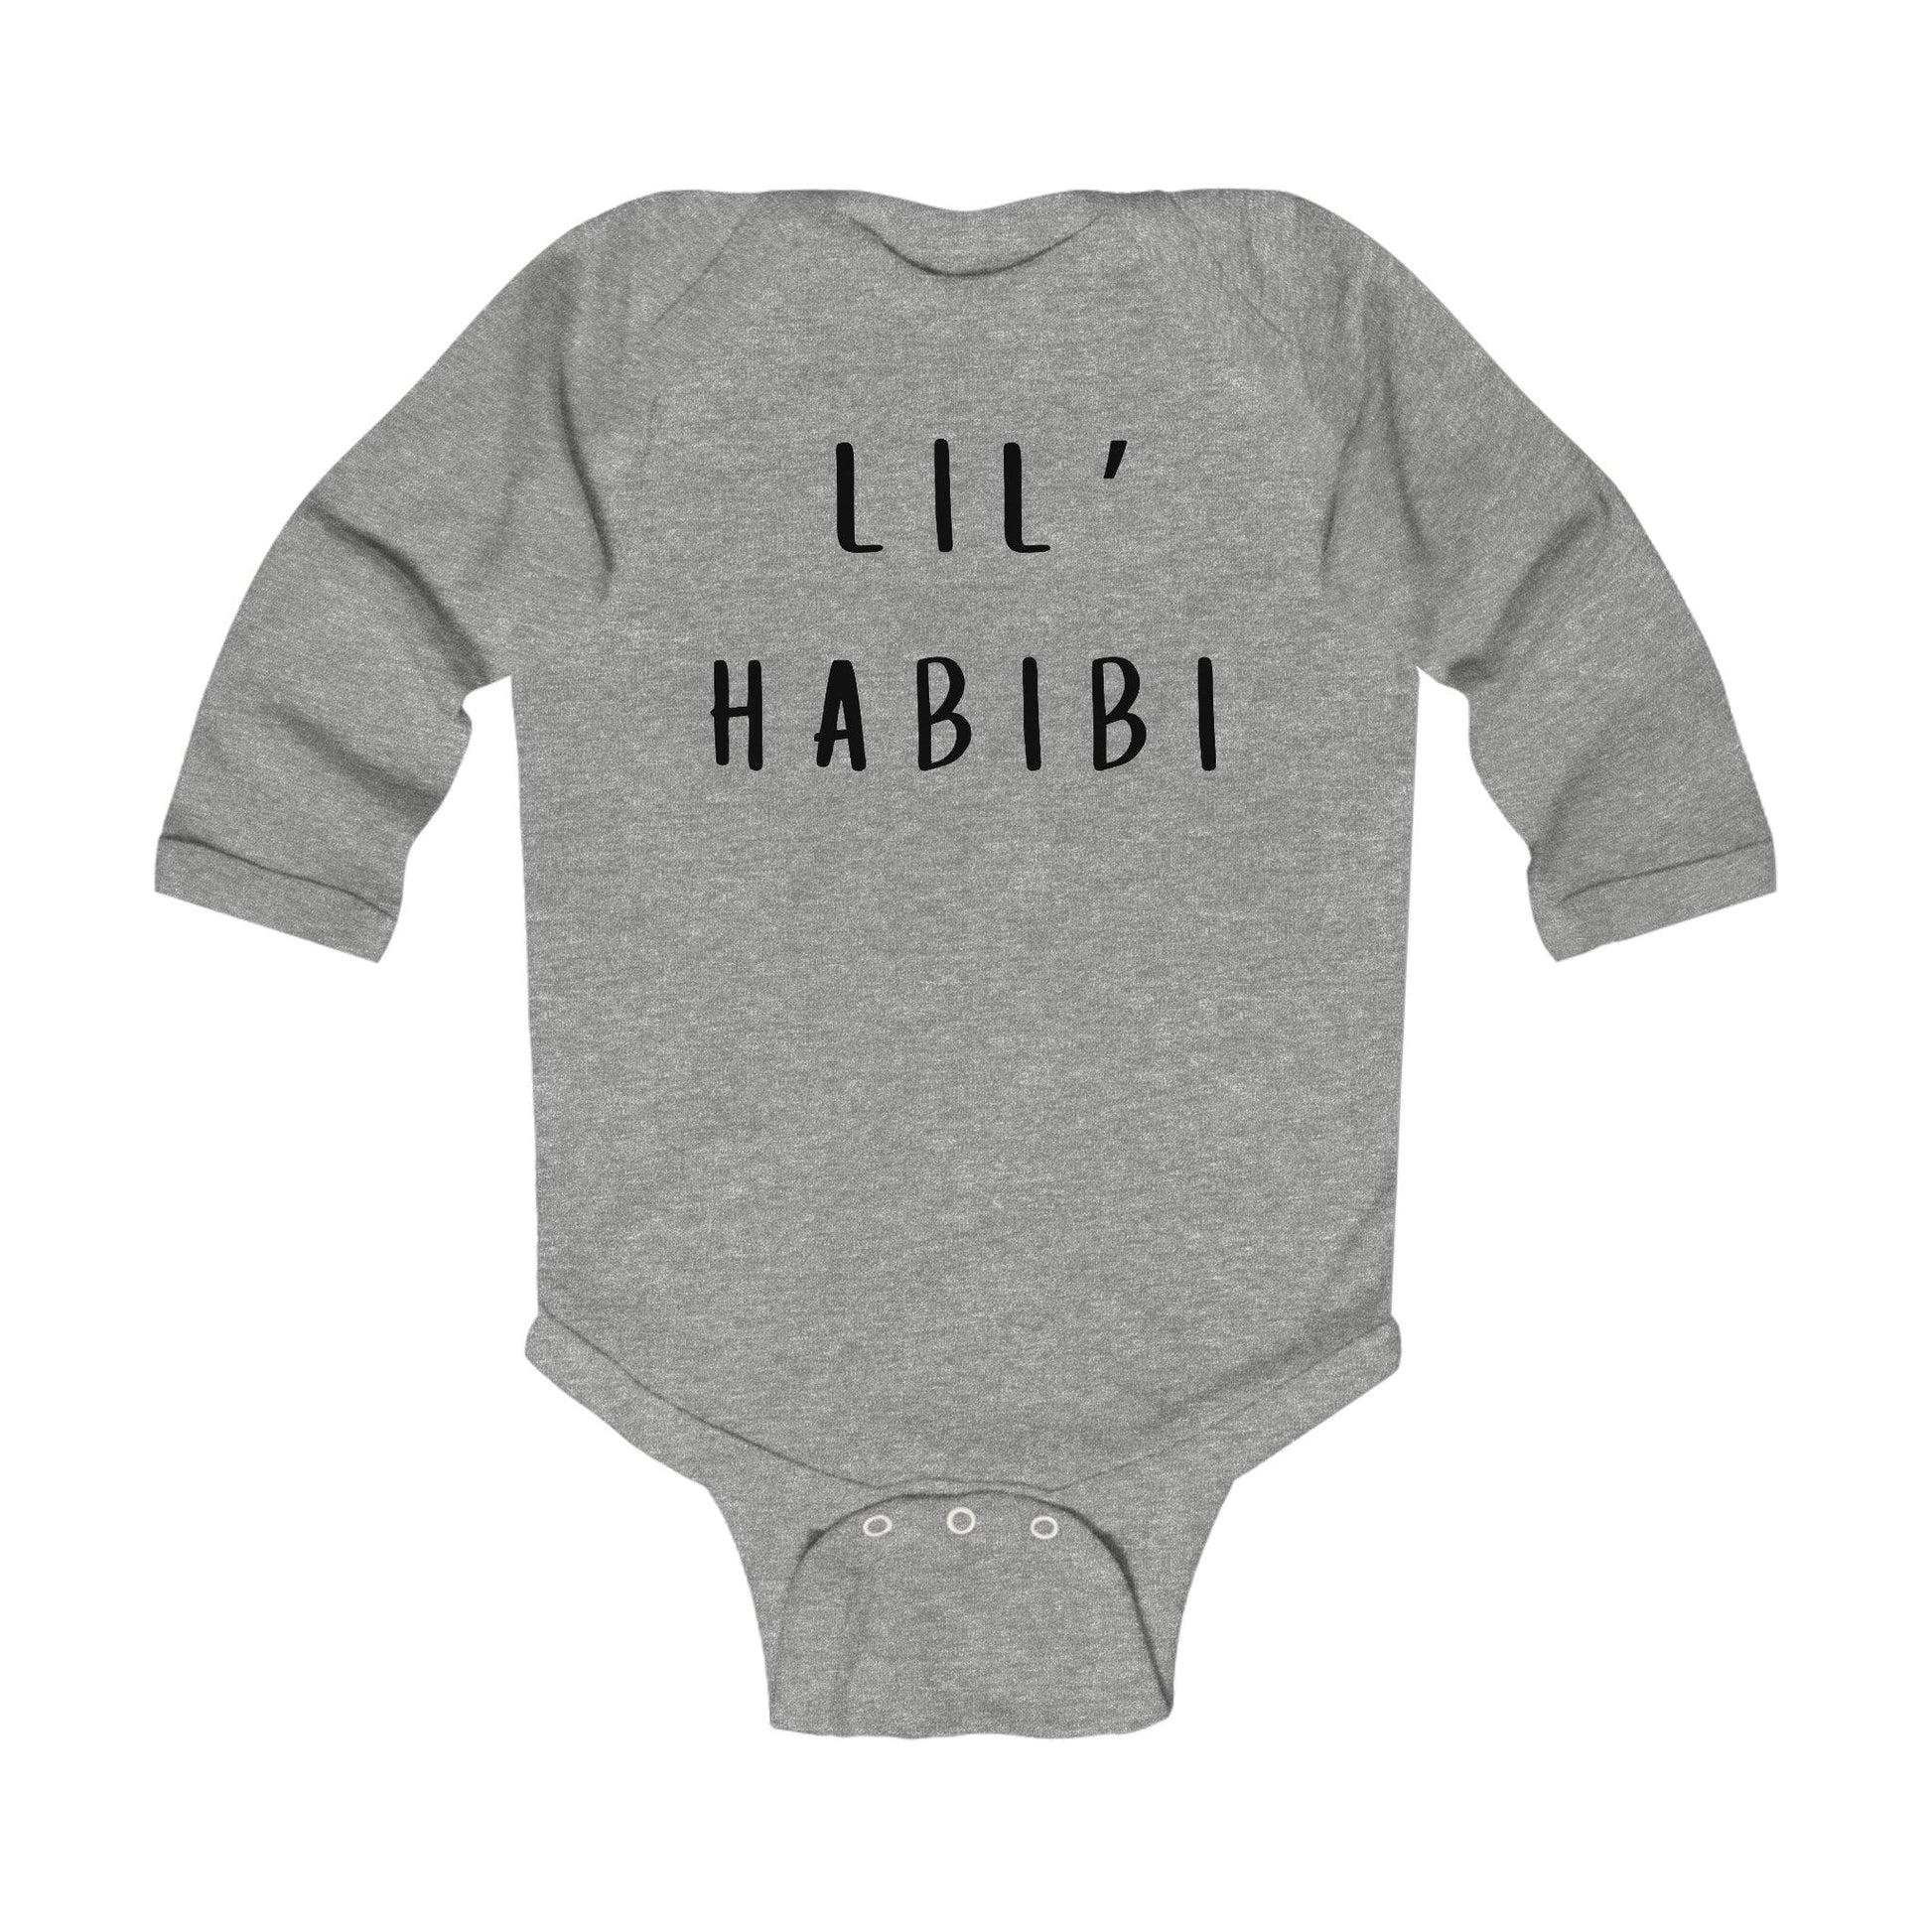 Lil' Habibi Long Sleeved Onesie for Muslim Baby | NB to 18 months - SunnahBay